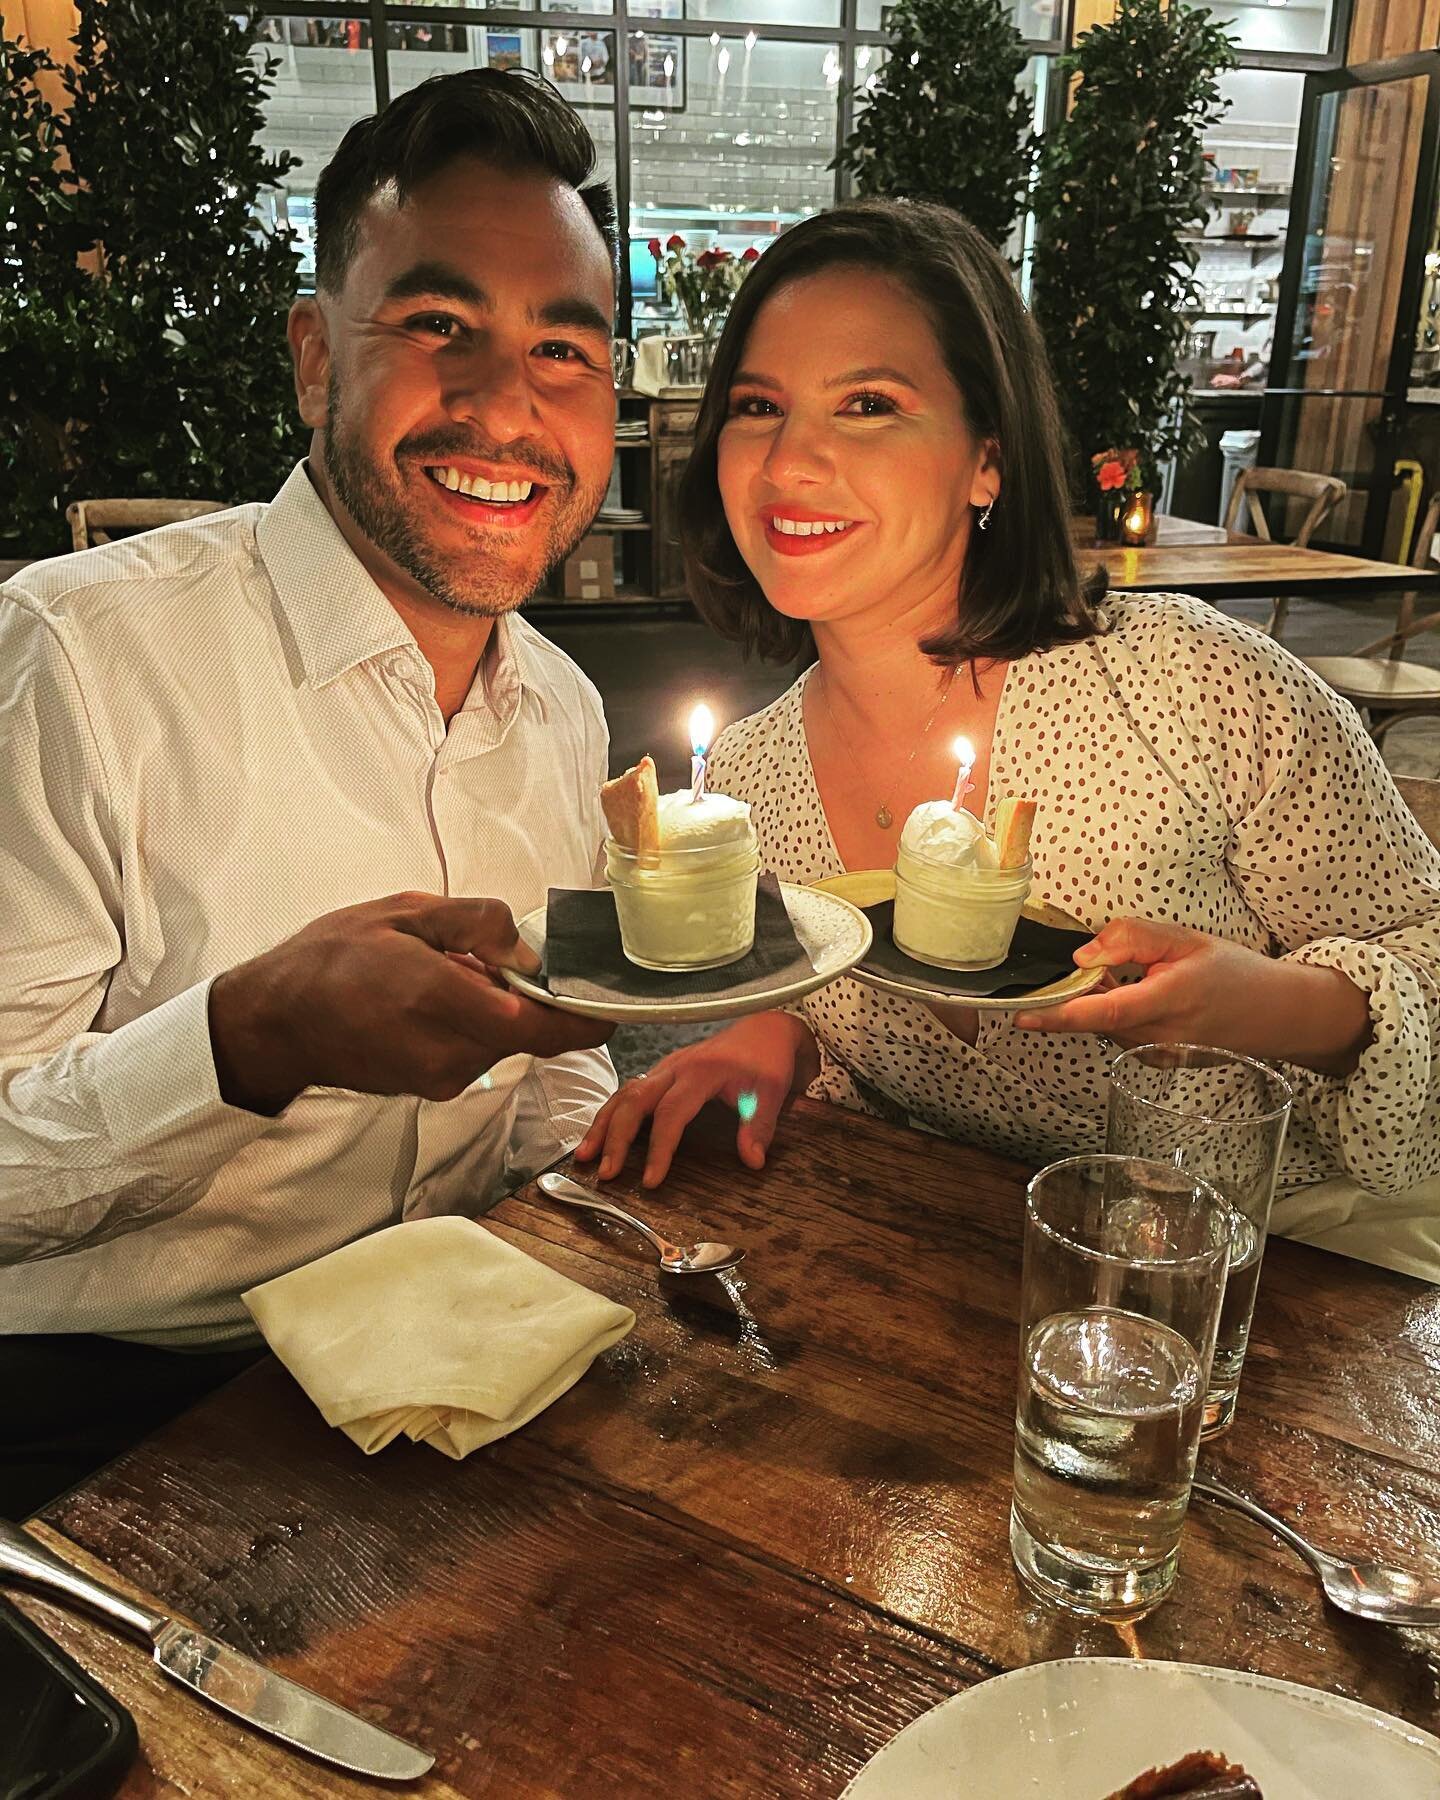 So proud of this guy for his milestone, we get to celebrate our birthdays together &amp; I wouldn&rsquo;t have it any other way 💗
Dinner with the fam at 1 of my FAVORITE restaurants in oc @farmhouseatrg 
The swordfish special is 😘chefs kiss !
.
.
.